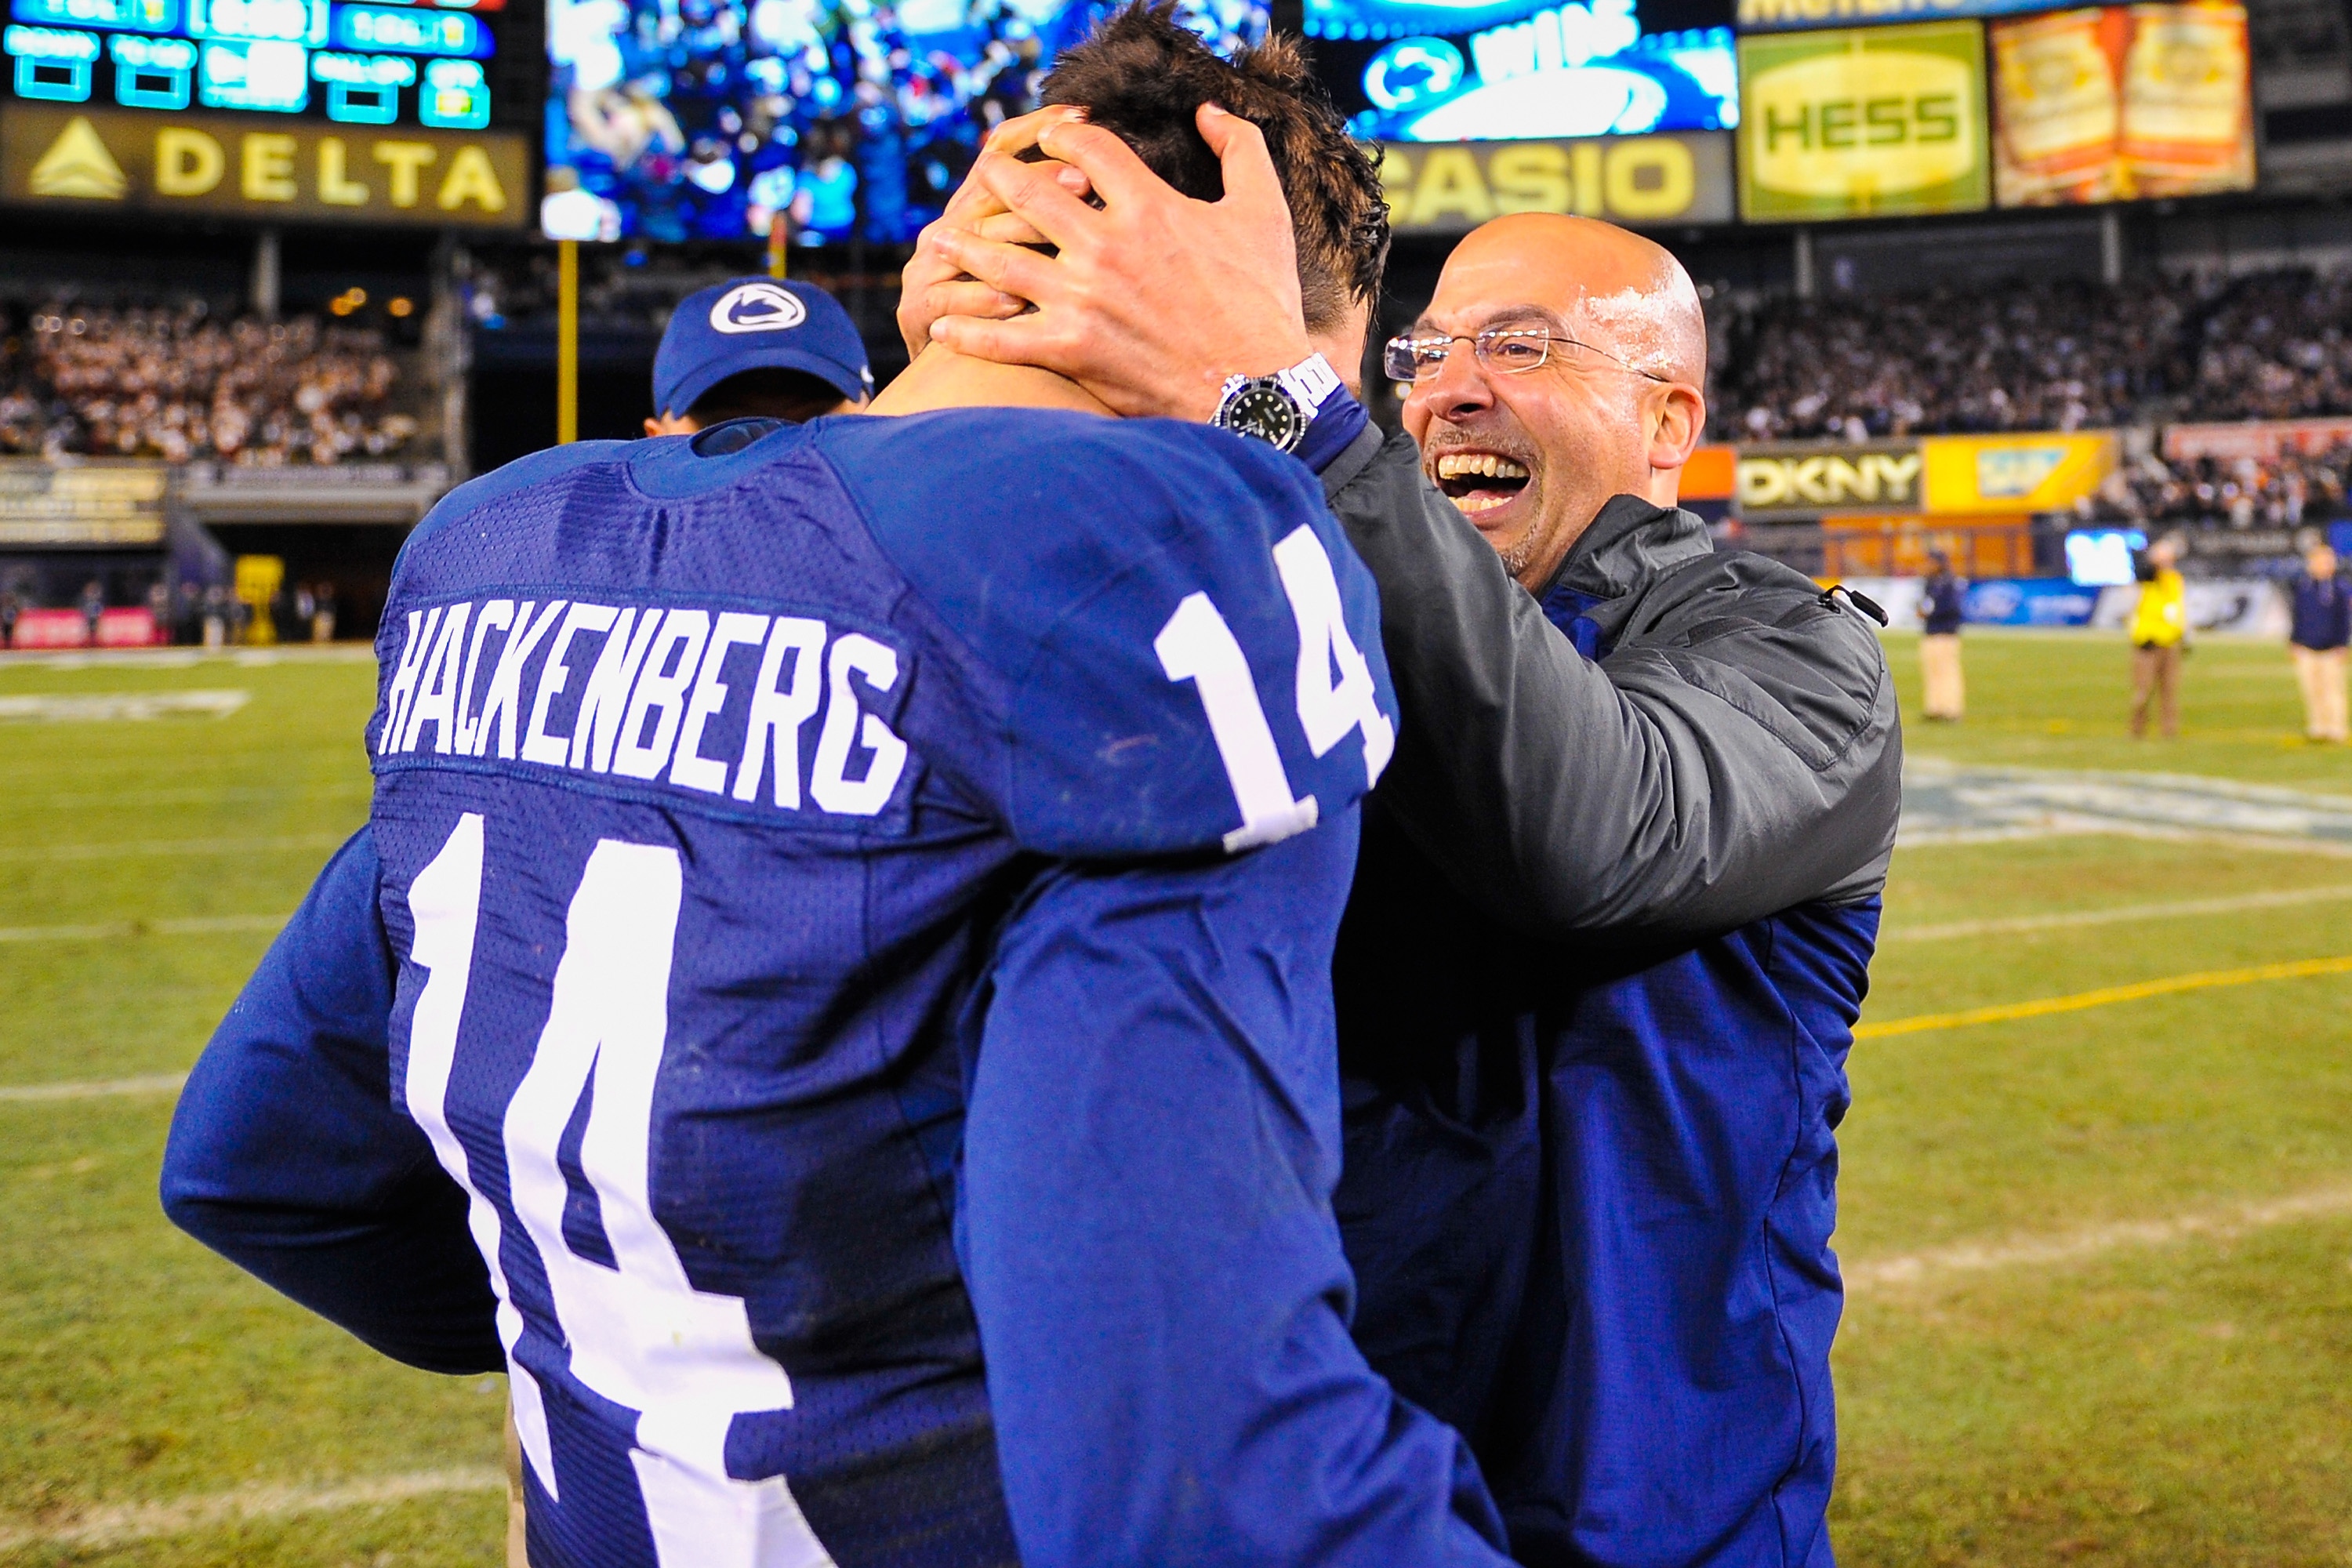 NEW YORK, NY - DECEMBER 27: Head coach James Franklin of the Penn State Nittany Lions celebrates with quaterback Christian Hackenberg #14 after defeating the Boston College Eagles in the 2014 New Era Pinstripe Bowl at Yankee Stadium on December 27, 2014 in the Bronx borough of New York City. (Photo by Alex Goodlett/Getty Images)